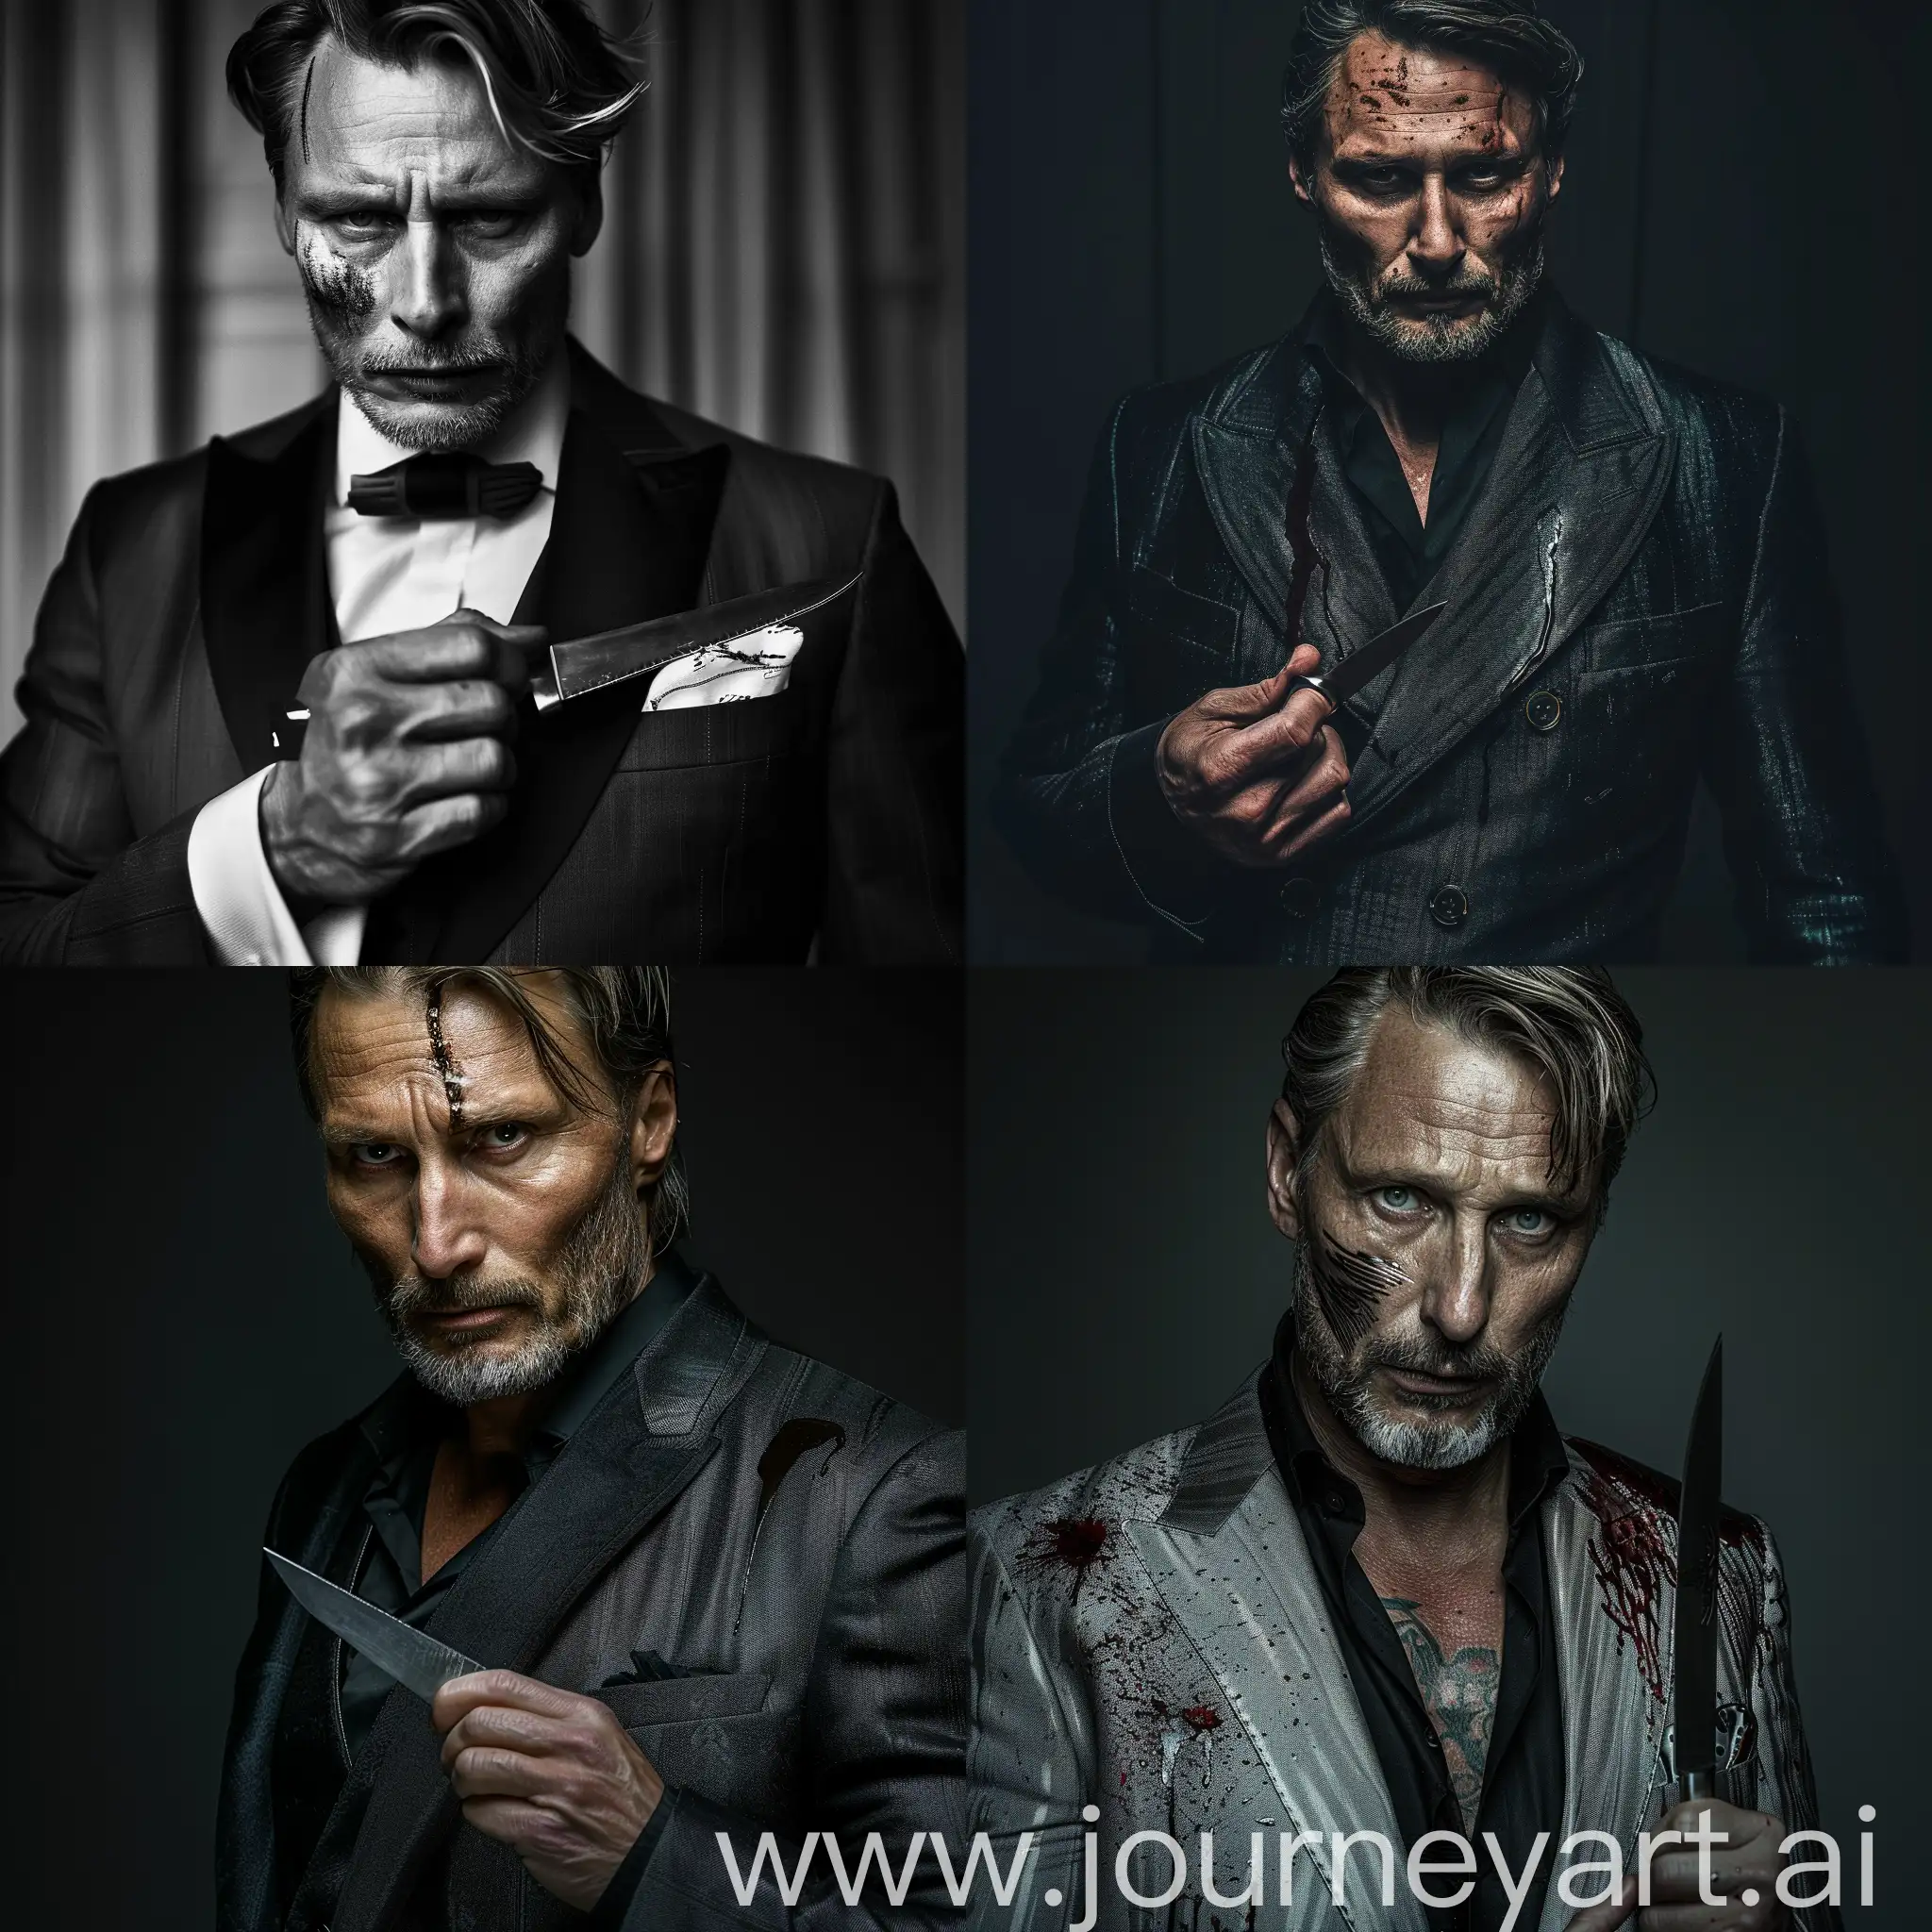 Mads-Mikkelsen-Wearing-Elegant-Suit-with-Knife-in-Hand-Cinematic-Realistic-Portrait